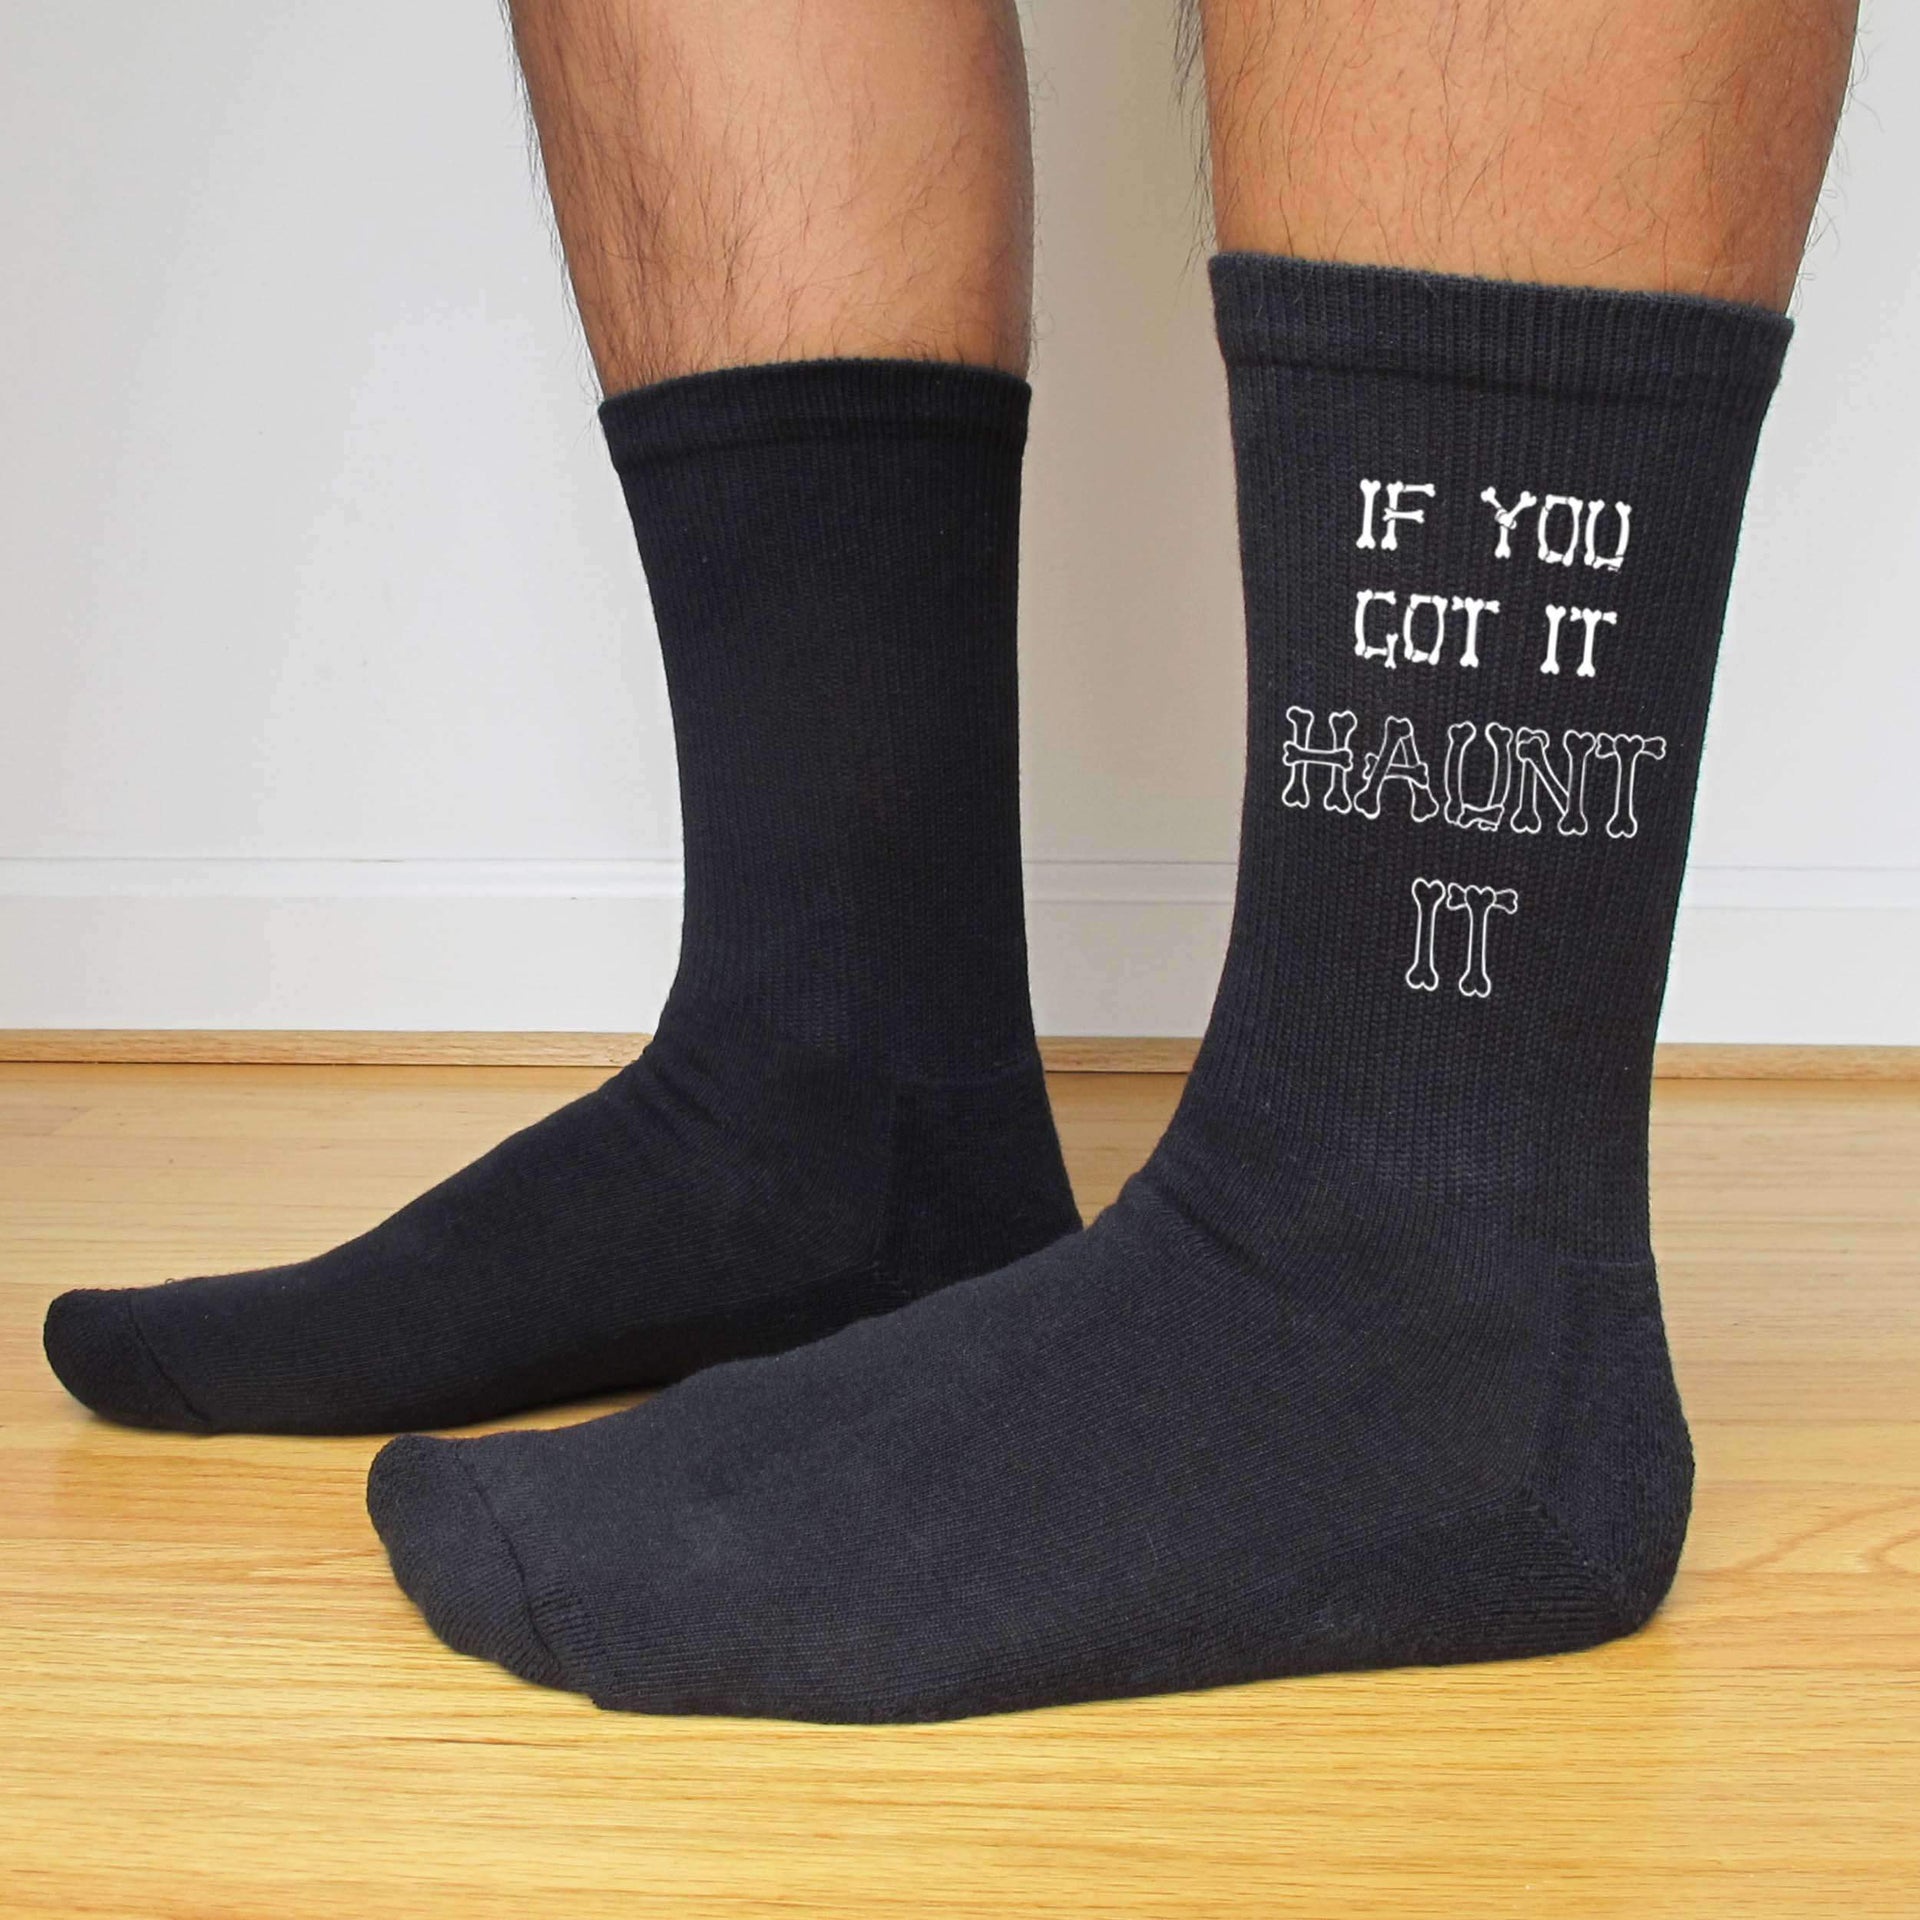 If you got it haunt it custom designed by sockprints and digitally printed on the side of ribbed crew socks.